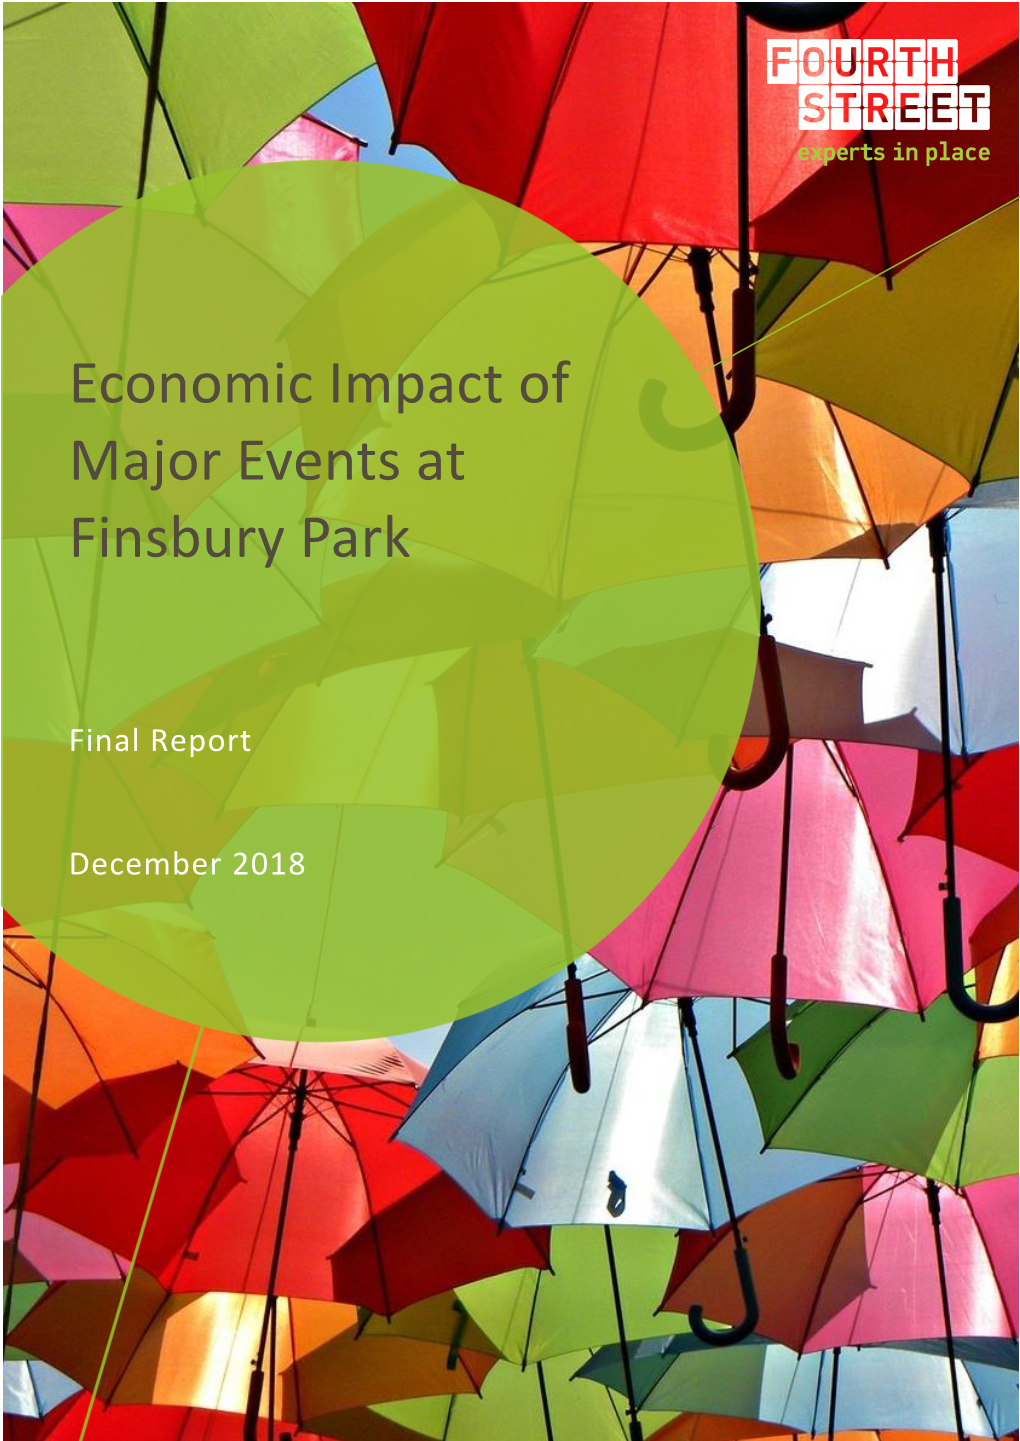 Economic Impact of Major Events at Finsbury Park